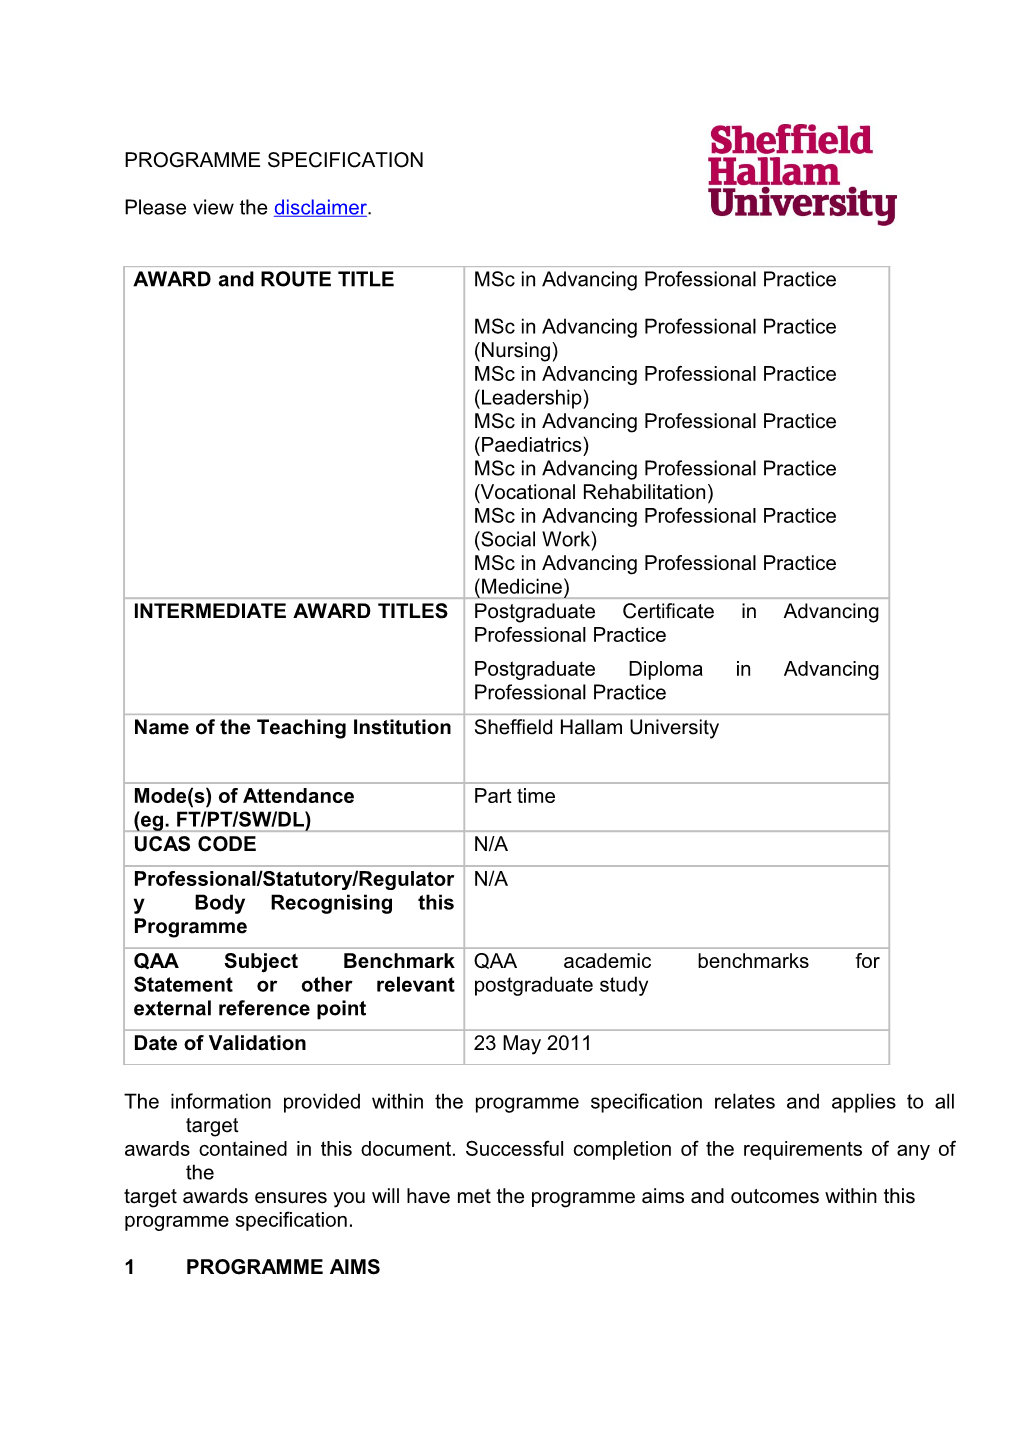 Awards Contained in This Document. Successful Completion of the Requirements of Any of The